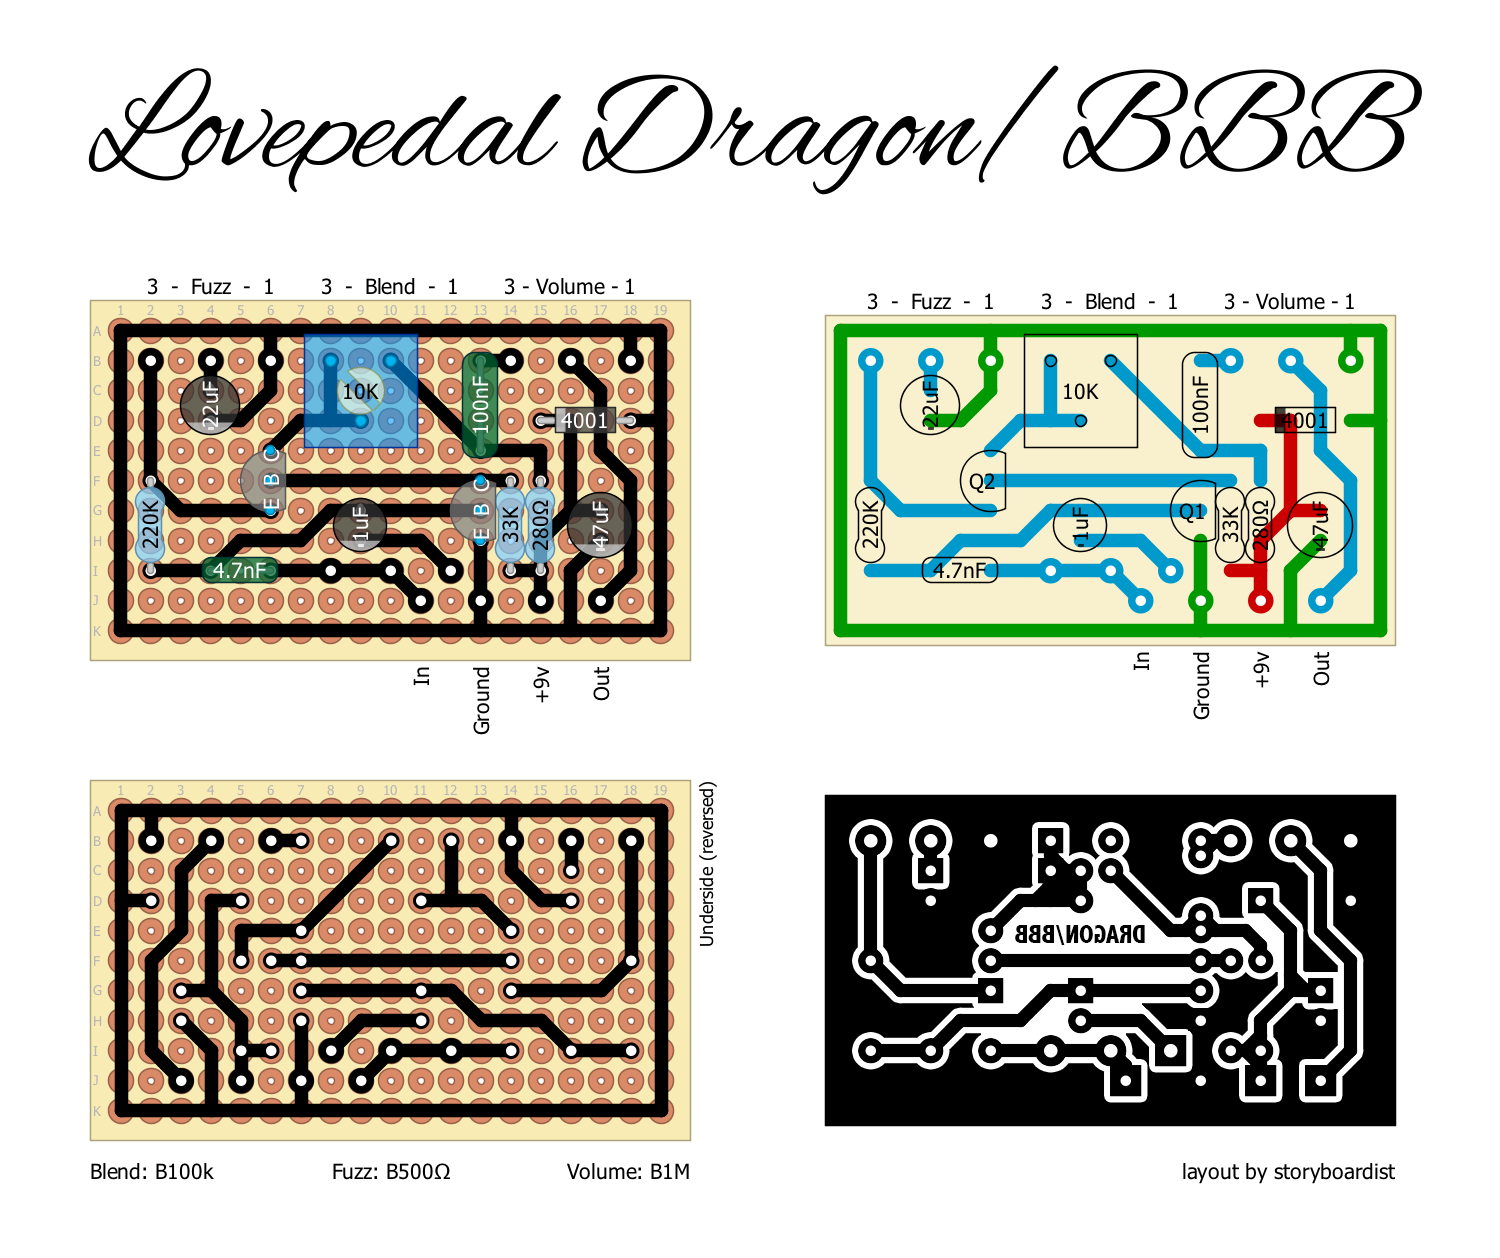 Perf and PCB Effects Layouts: Lovepedal Dragon, BBB, etc.